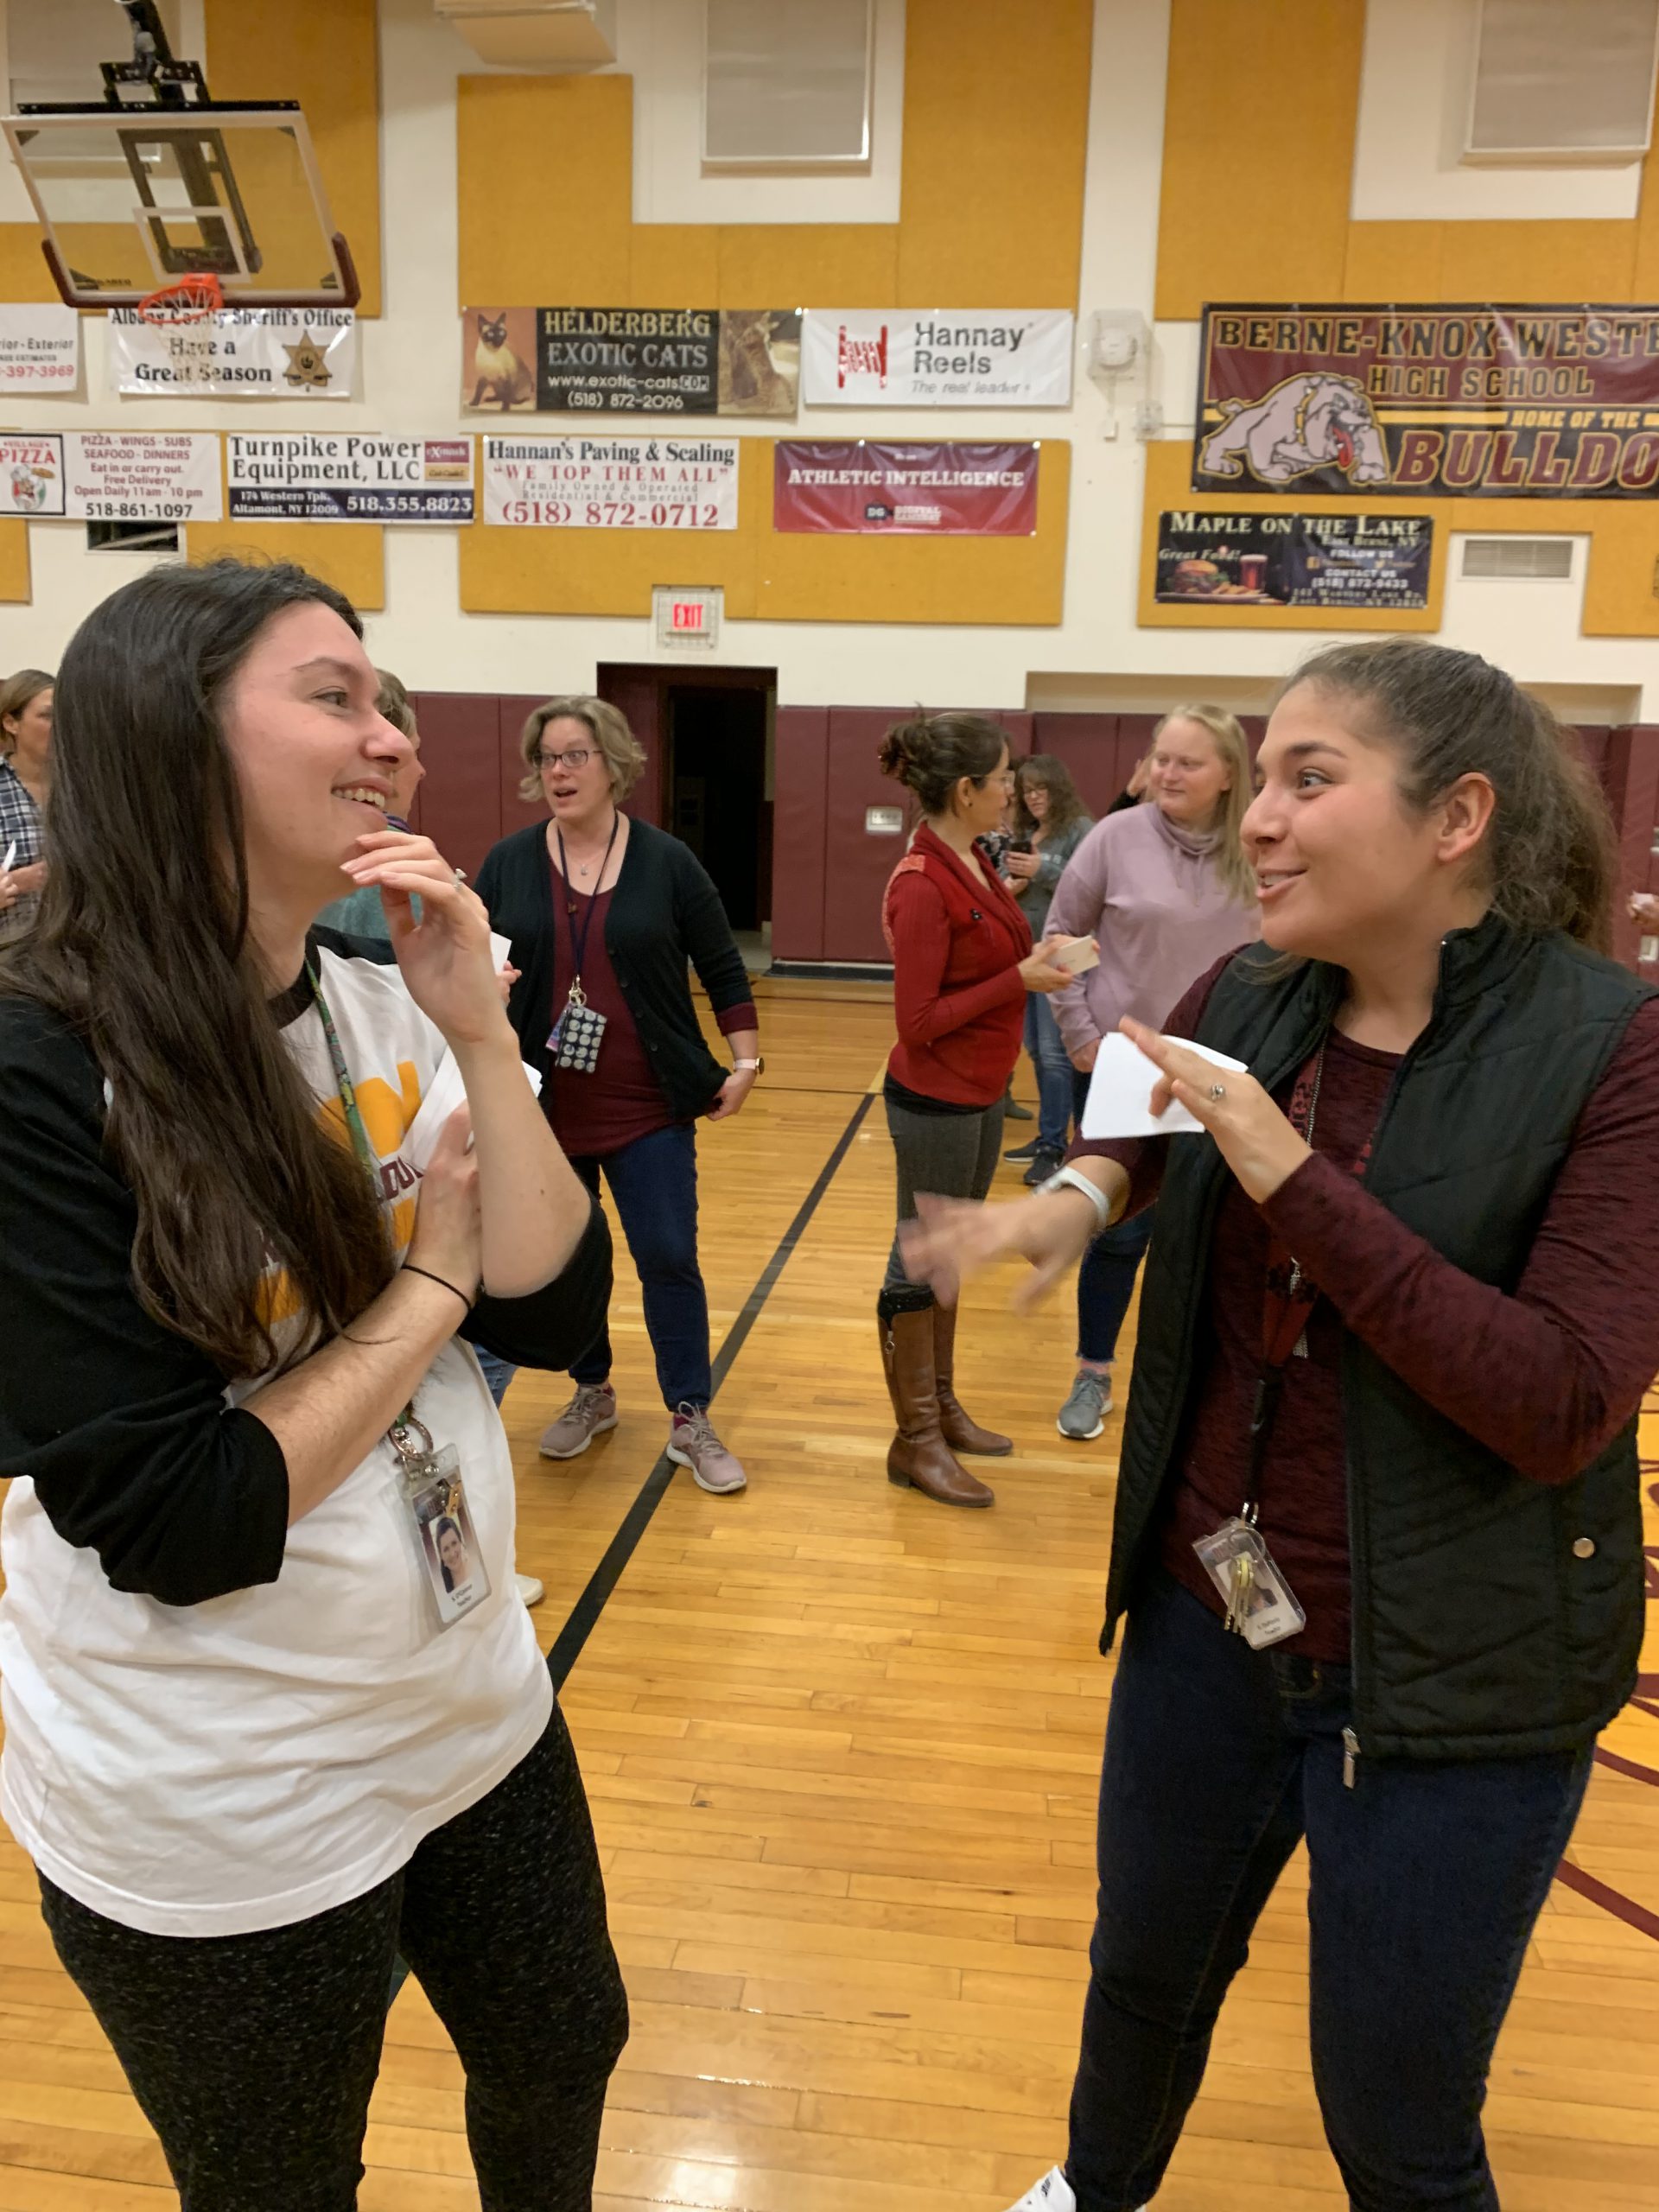 staff members mingle in the gym